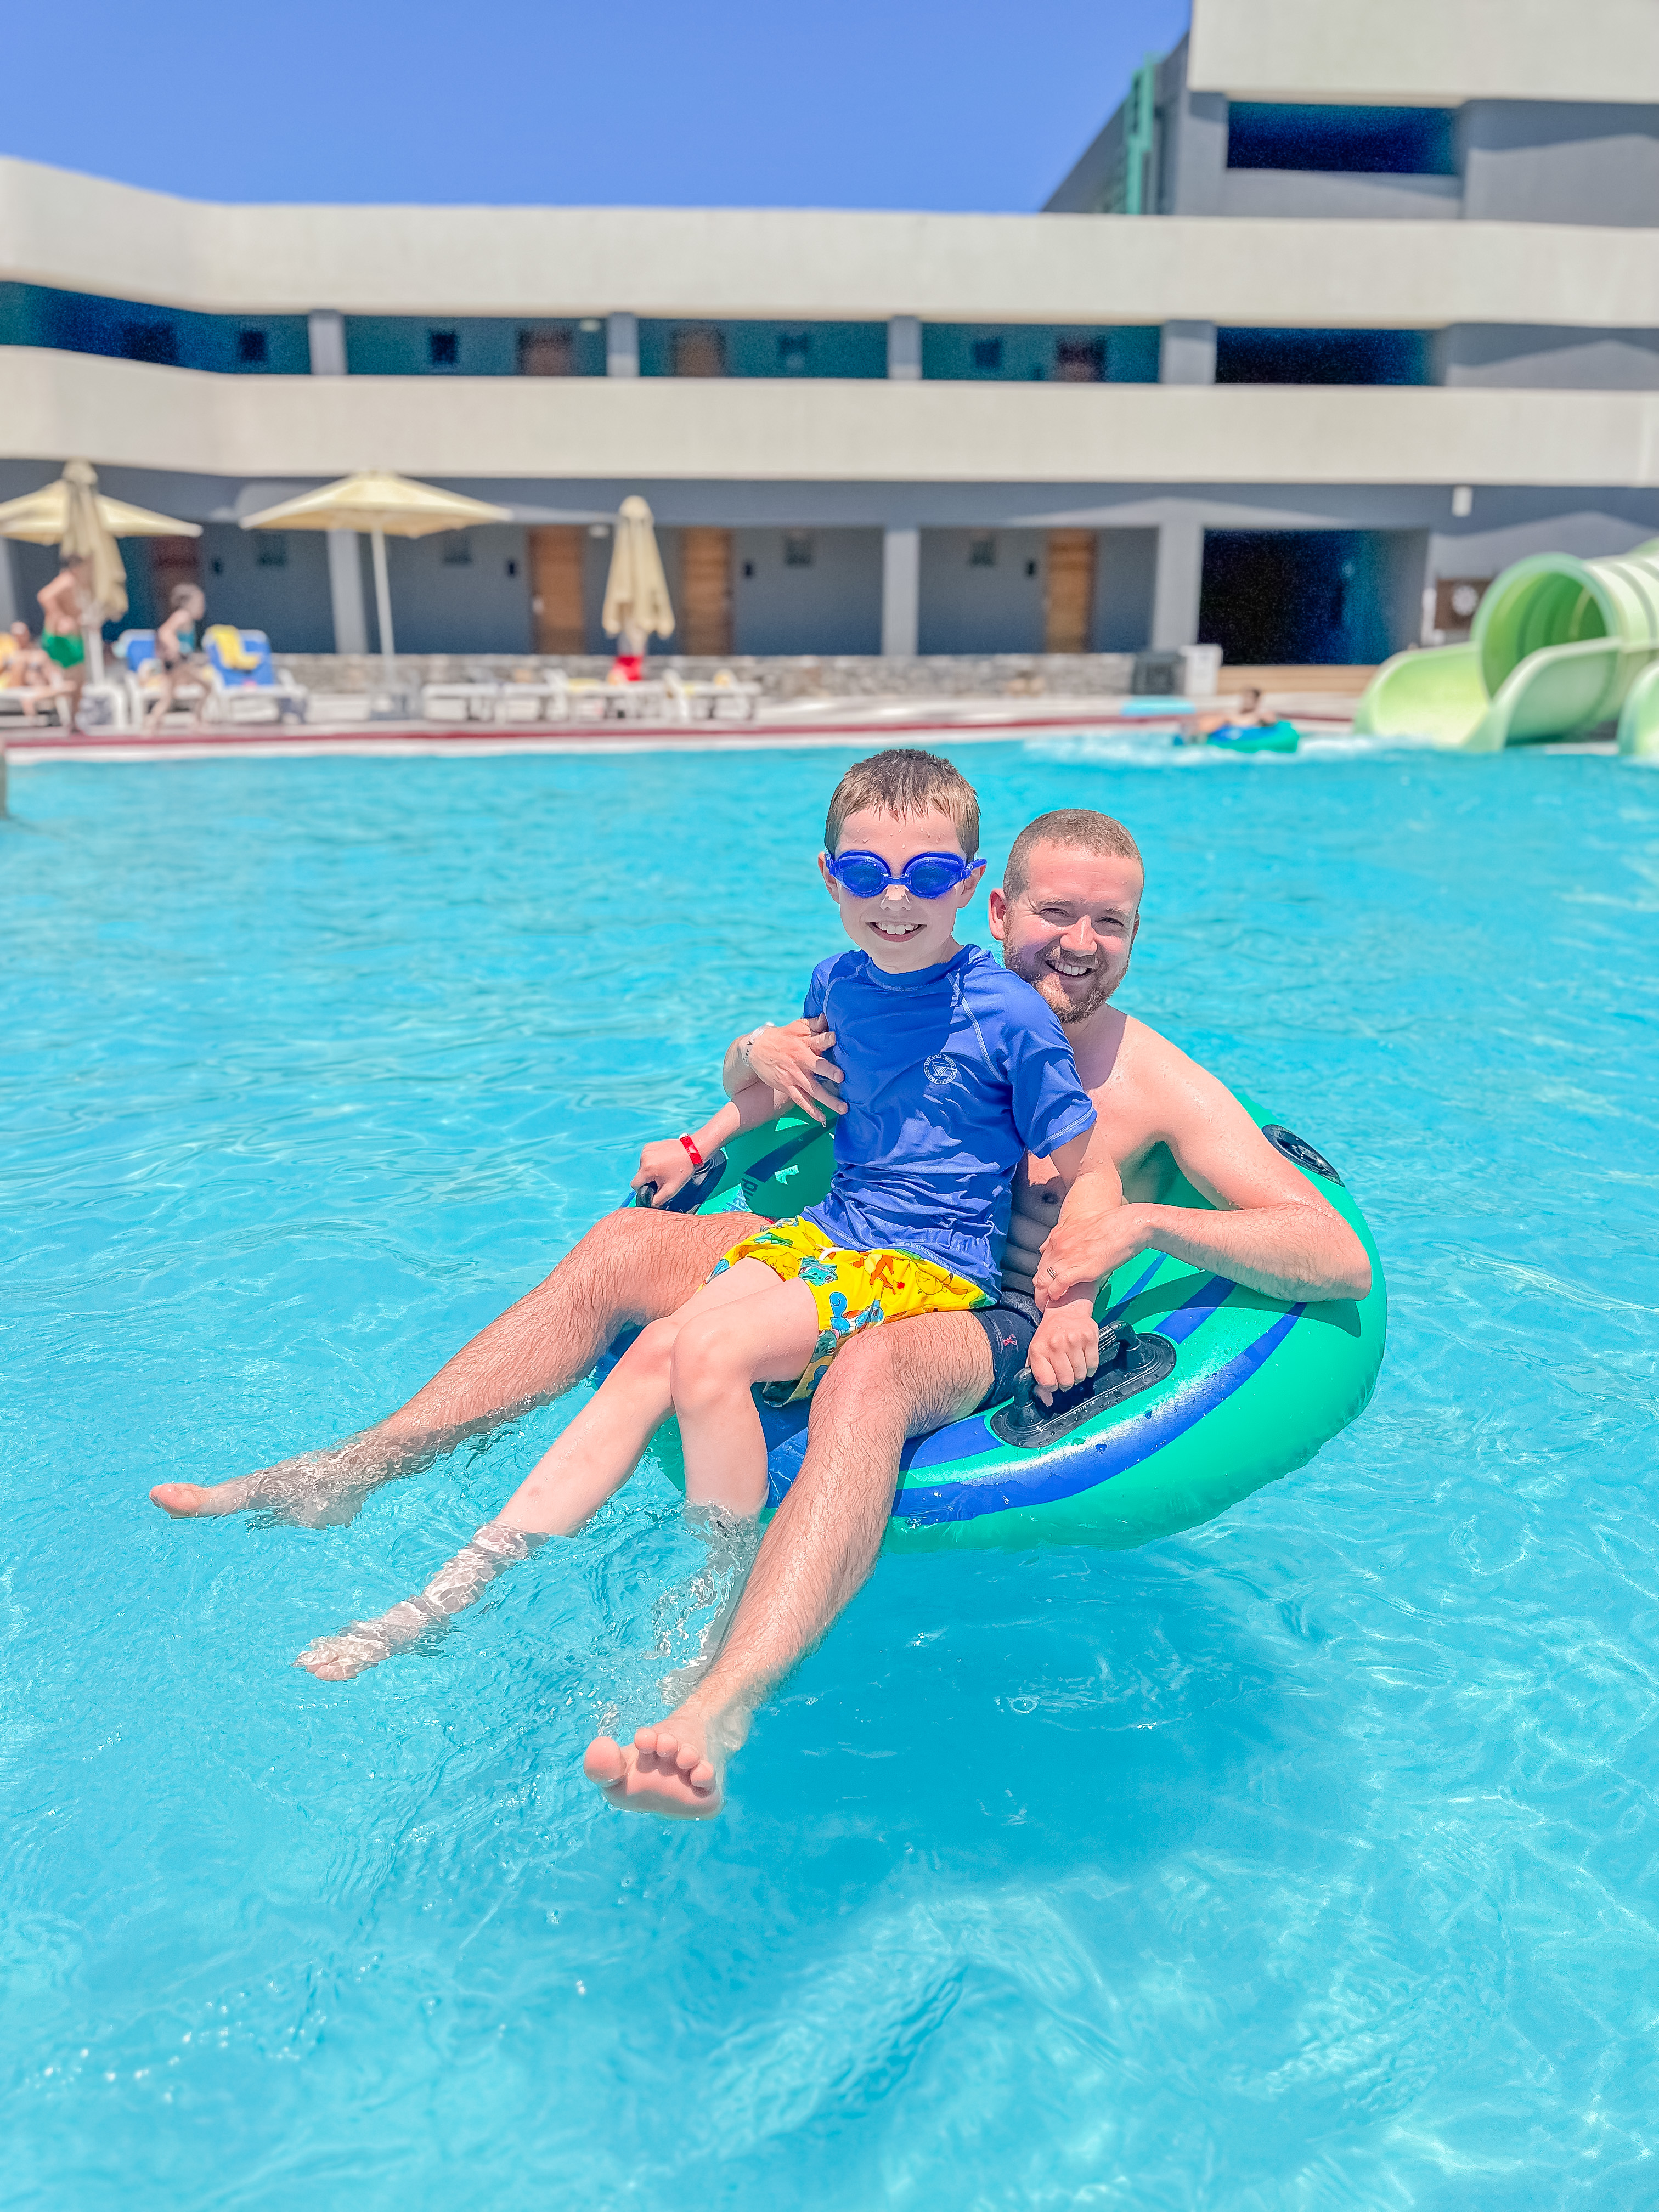 Arina beach Hotel, all inclusive holiday Greece review